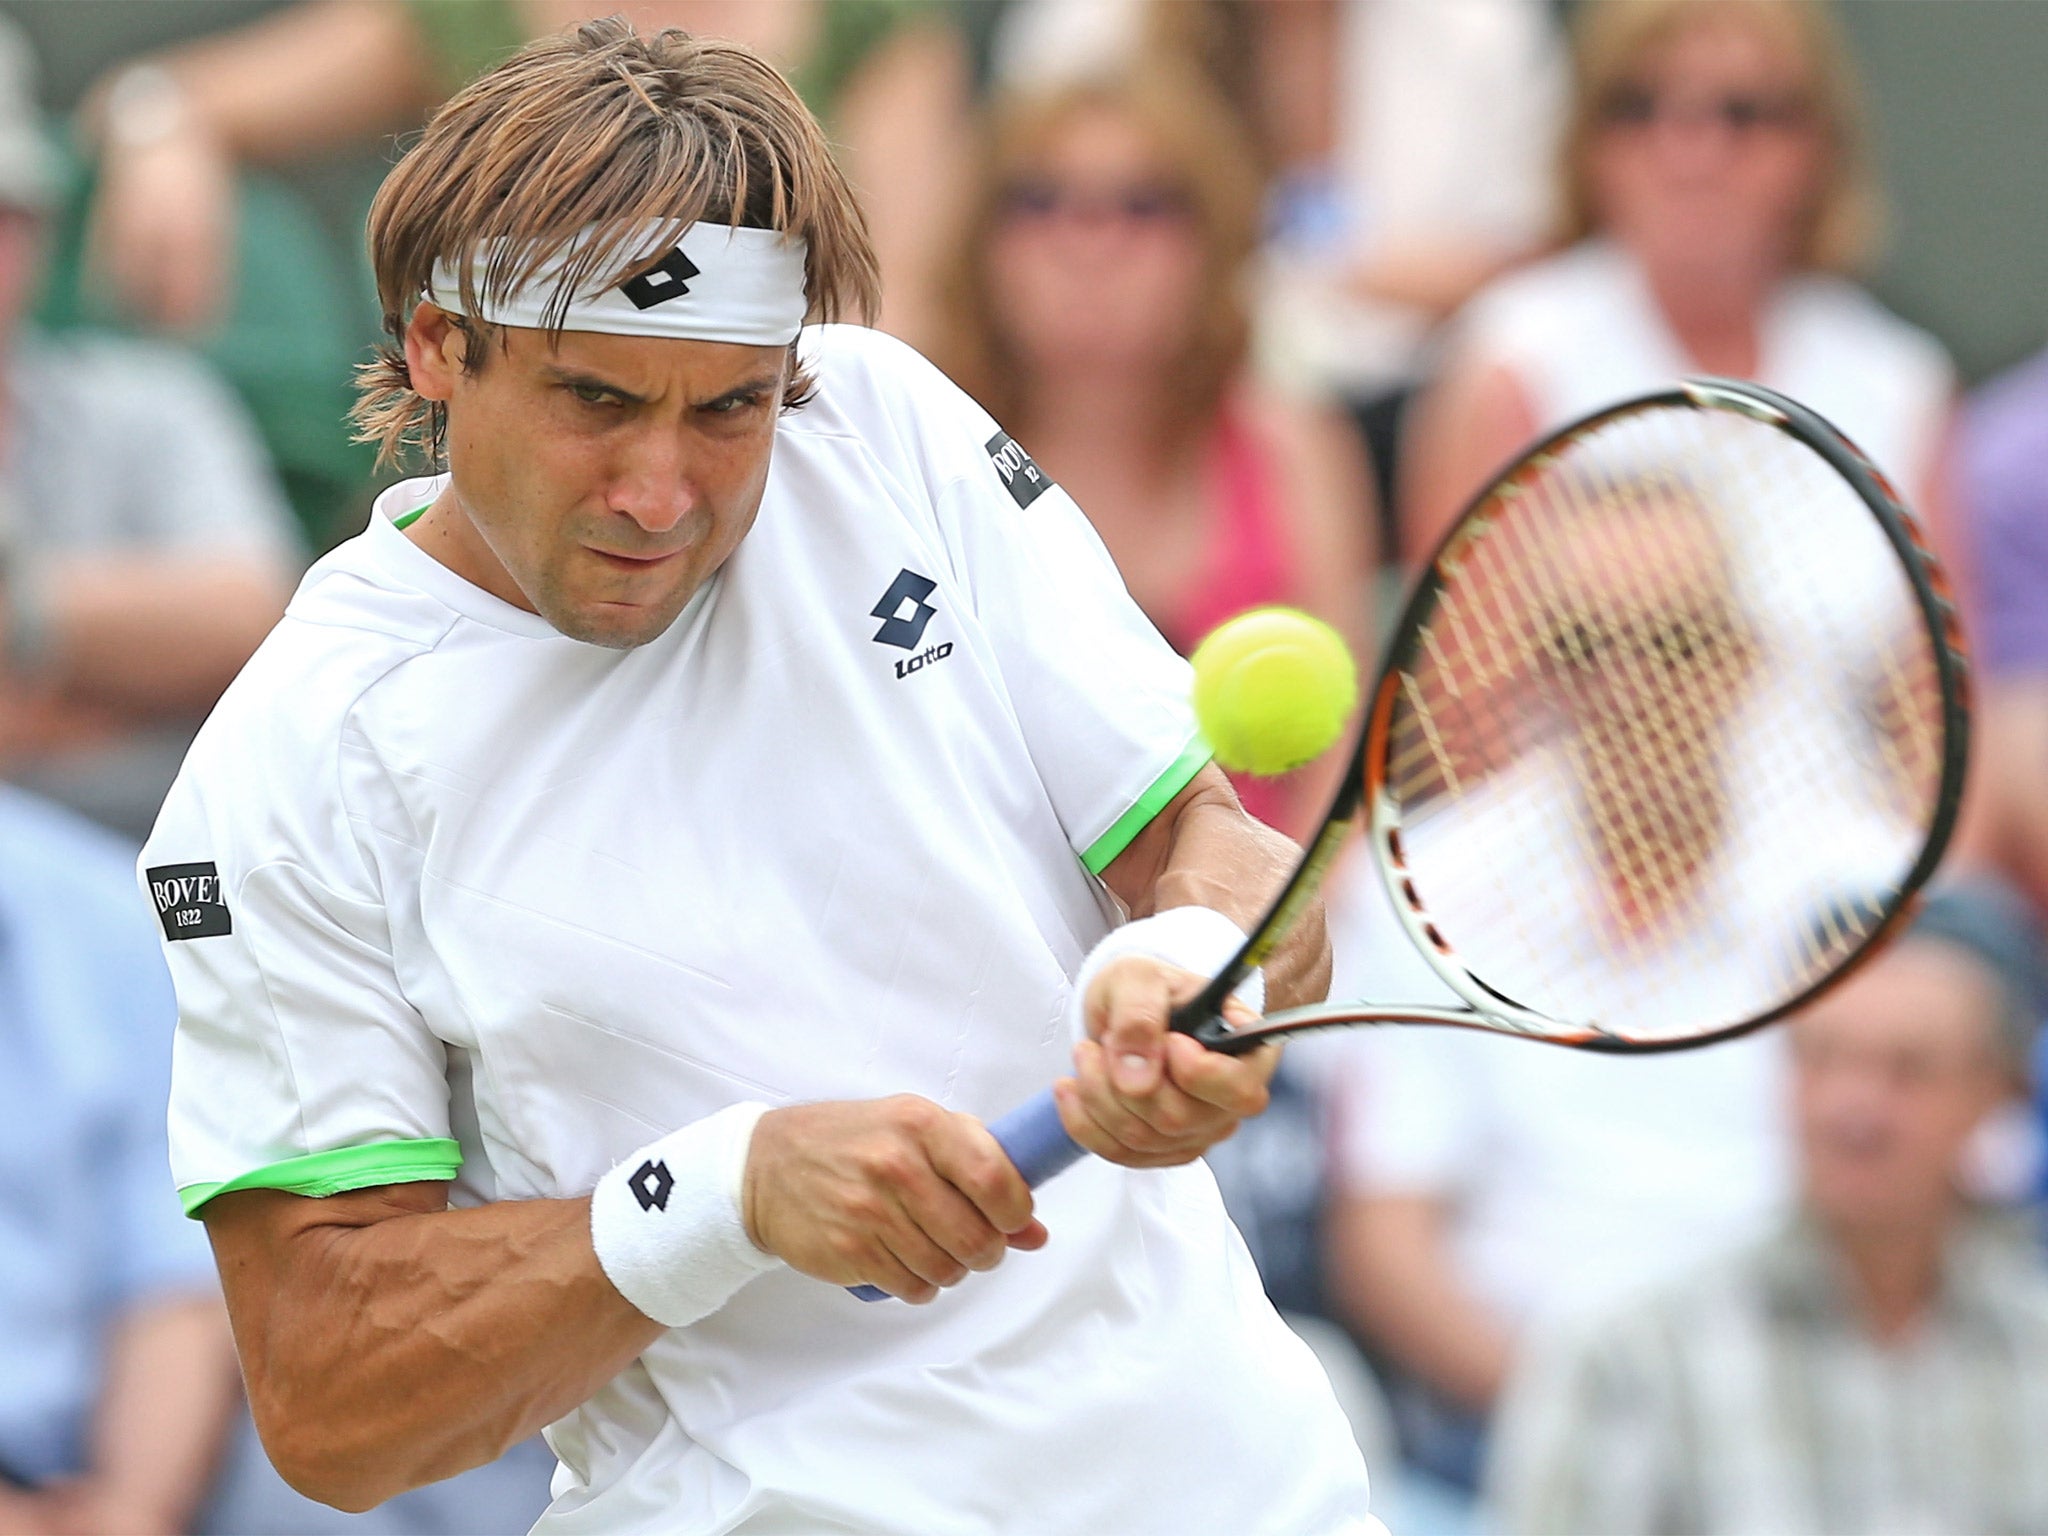 David Ferrer has proved his ability on all surfaces